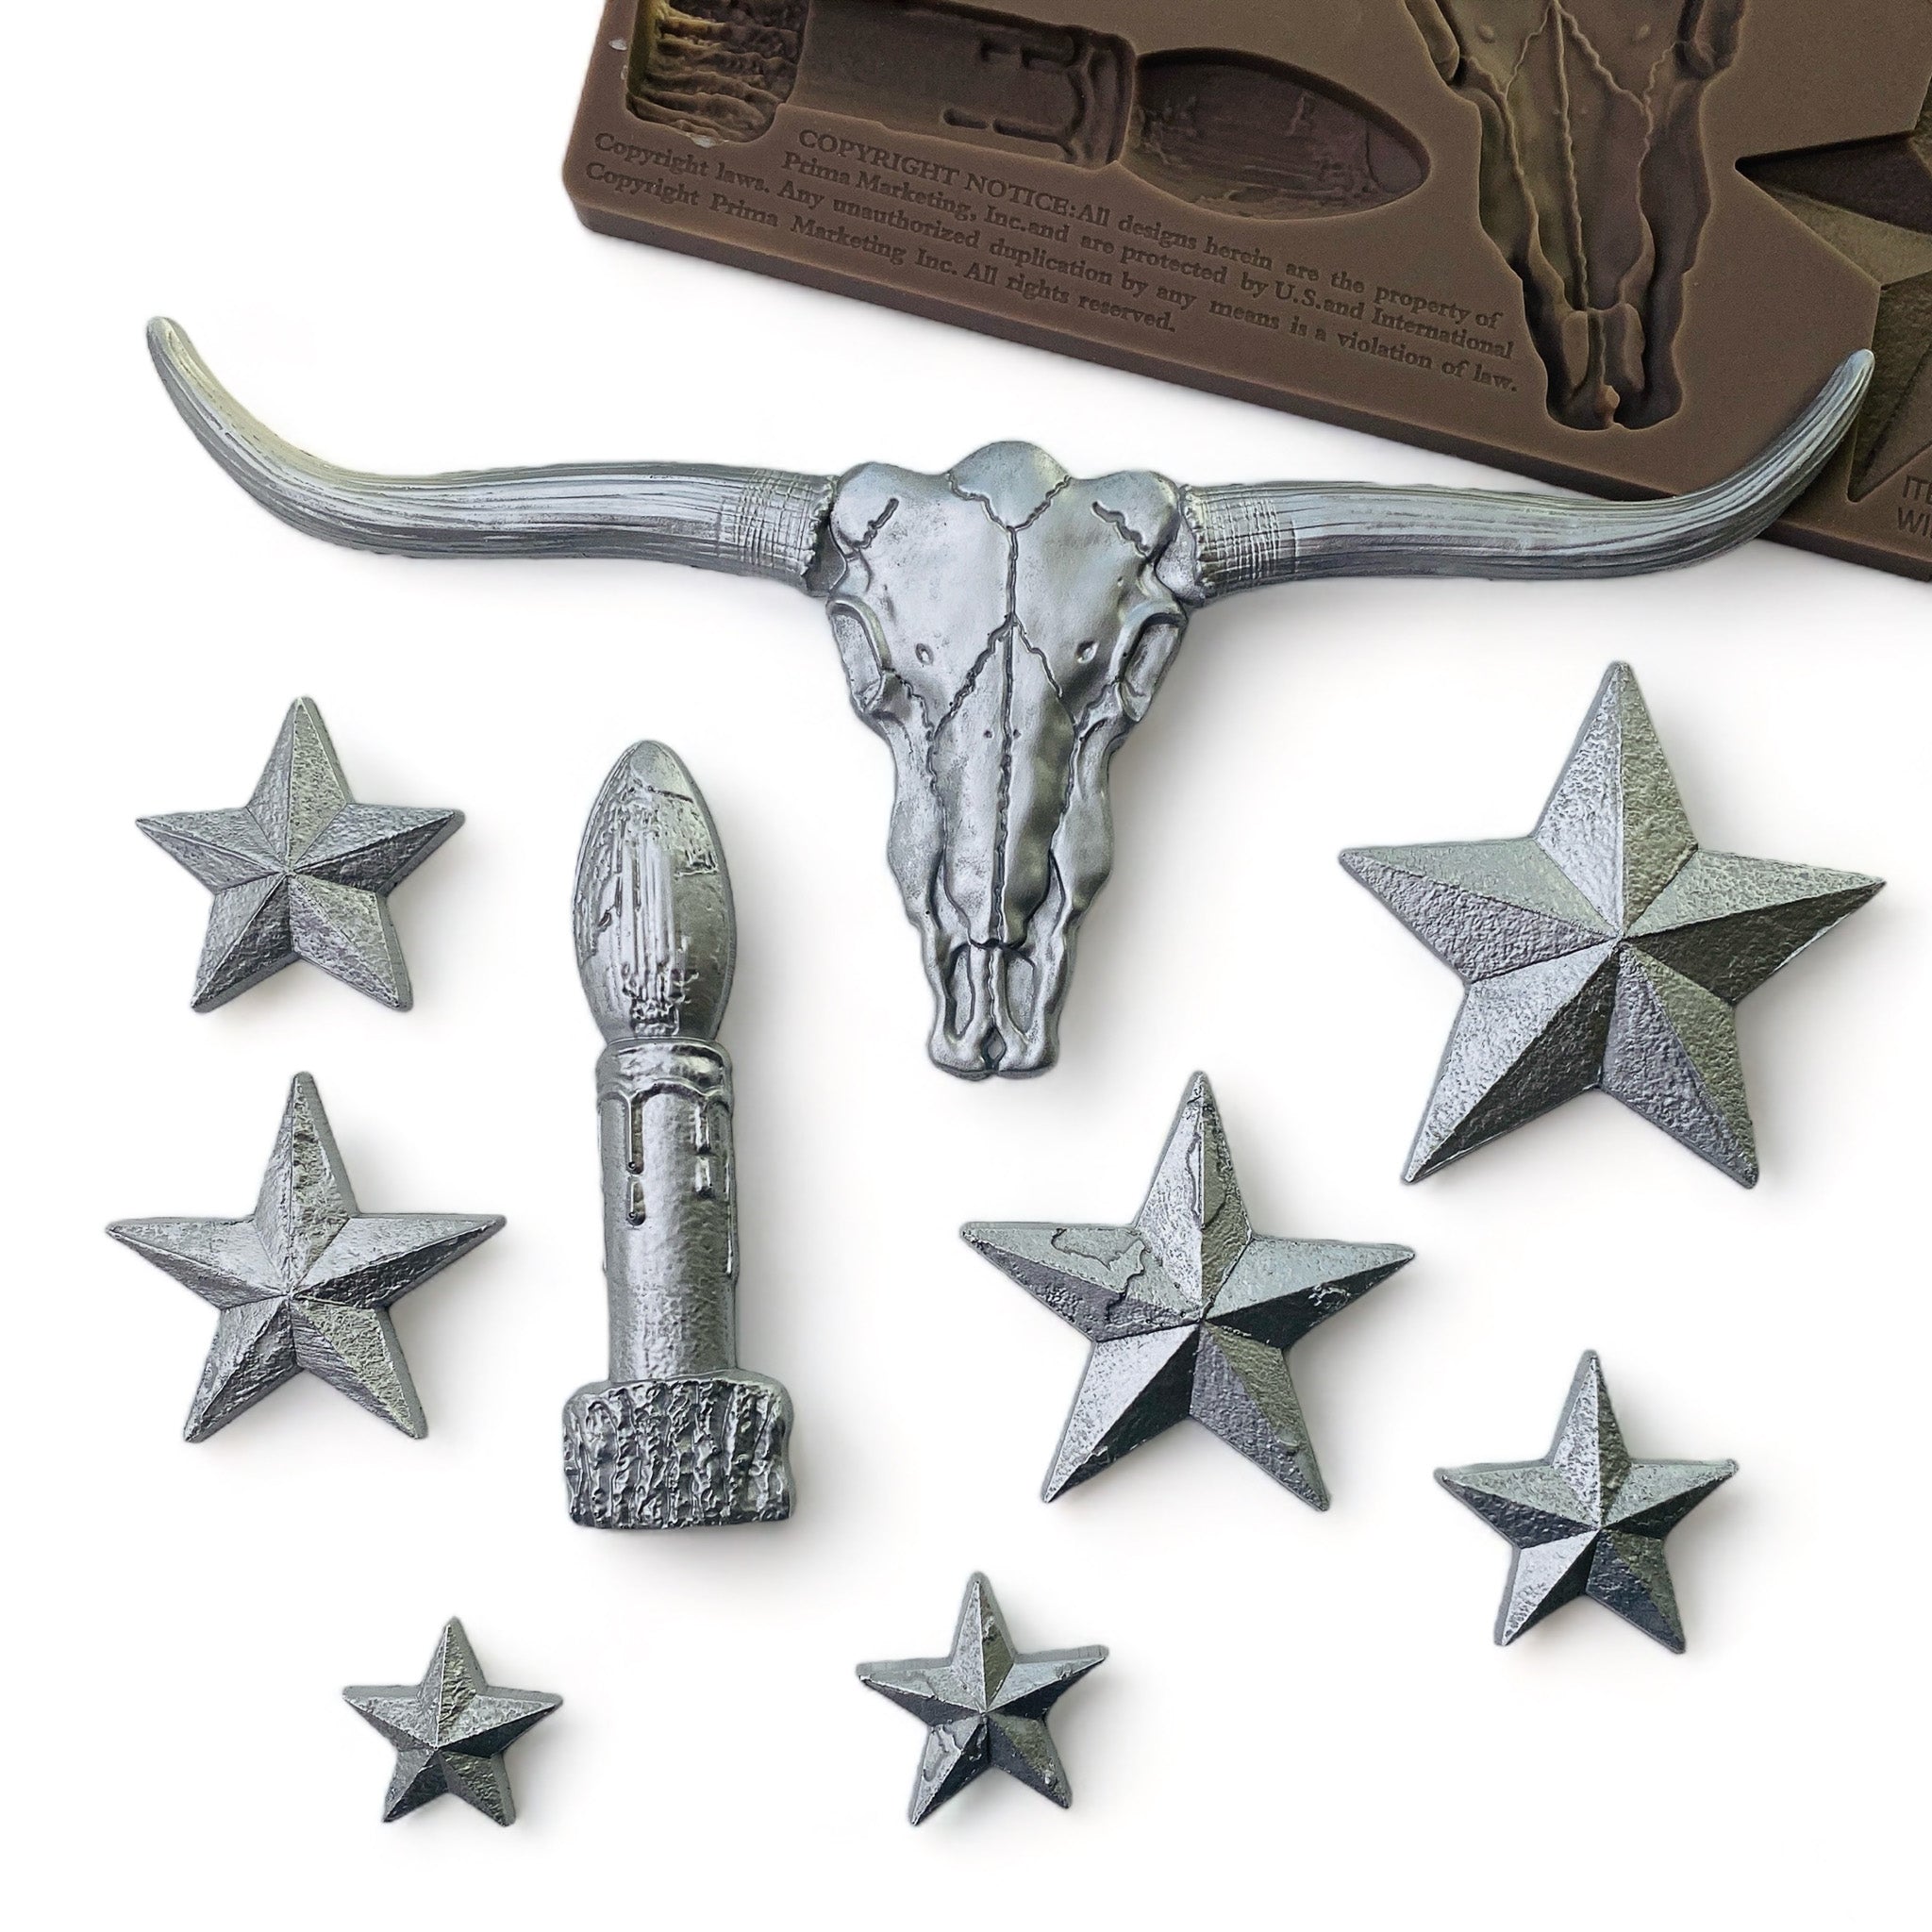 Silver colored silicone mold castings of a candle stick, longhorn bull skull, and 7 varying sizes of Texas style stars are against a white background.